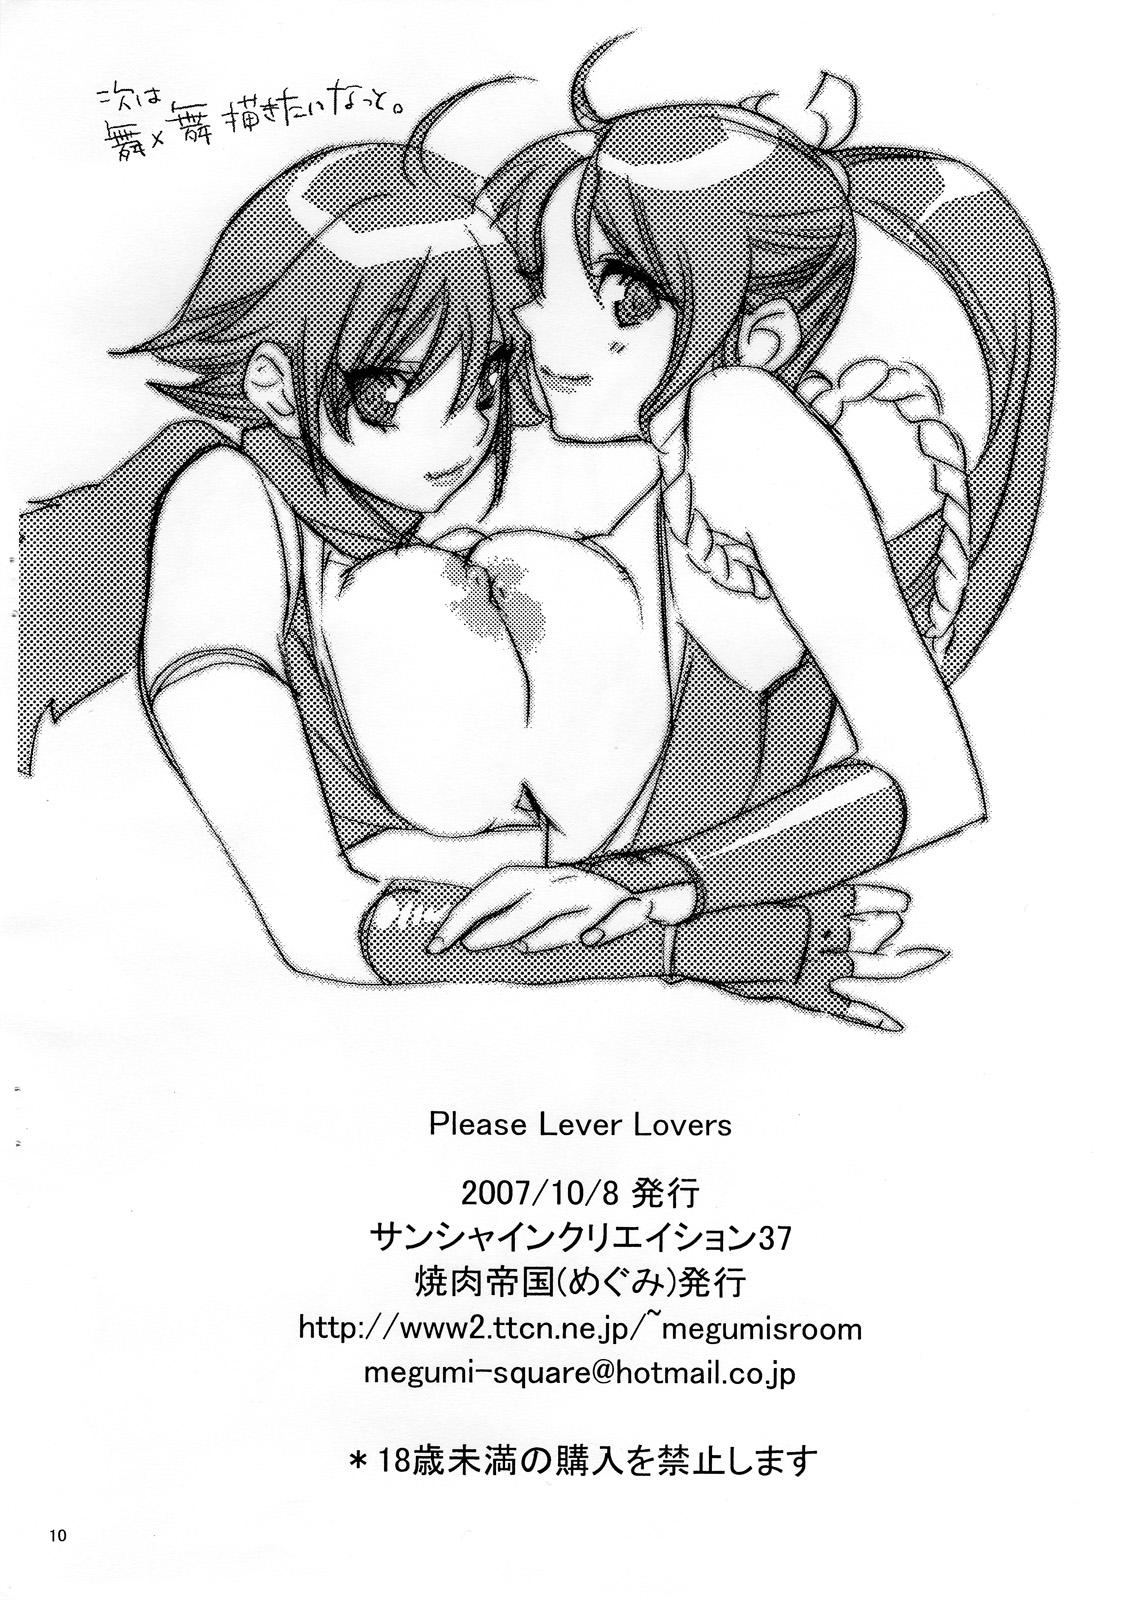 Spy Please Lever Lover - King of fighters Fresh - Page 10